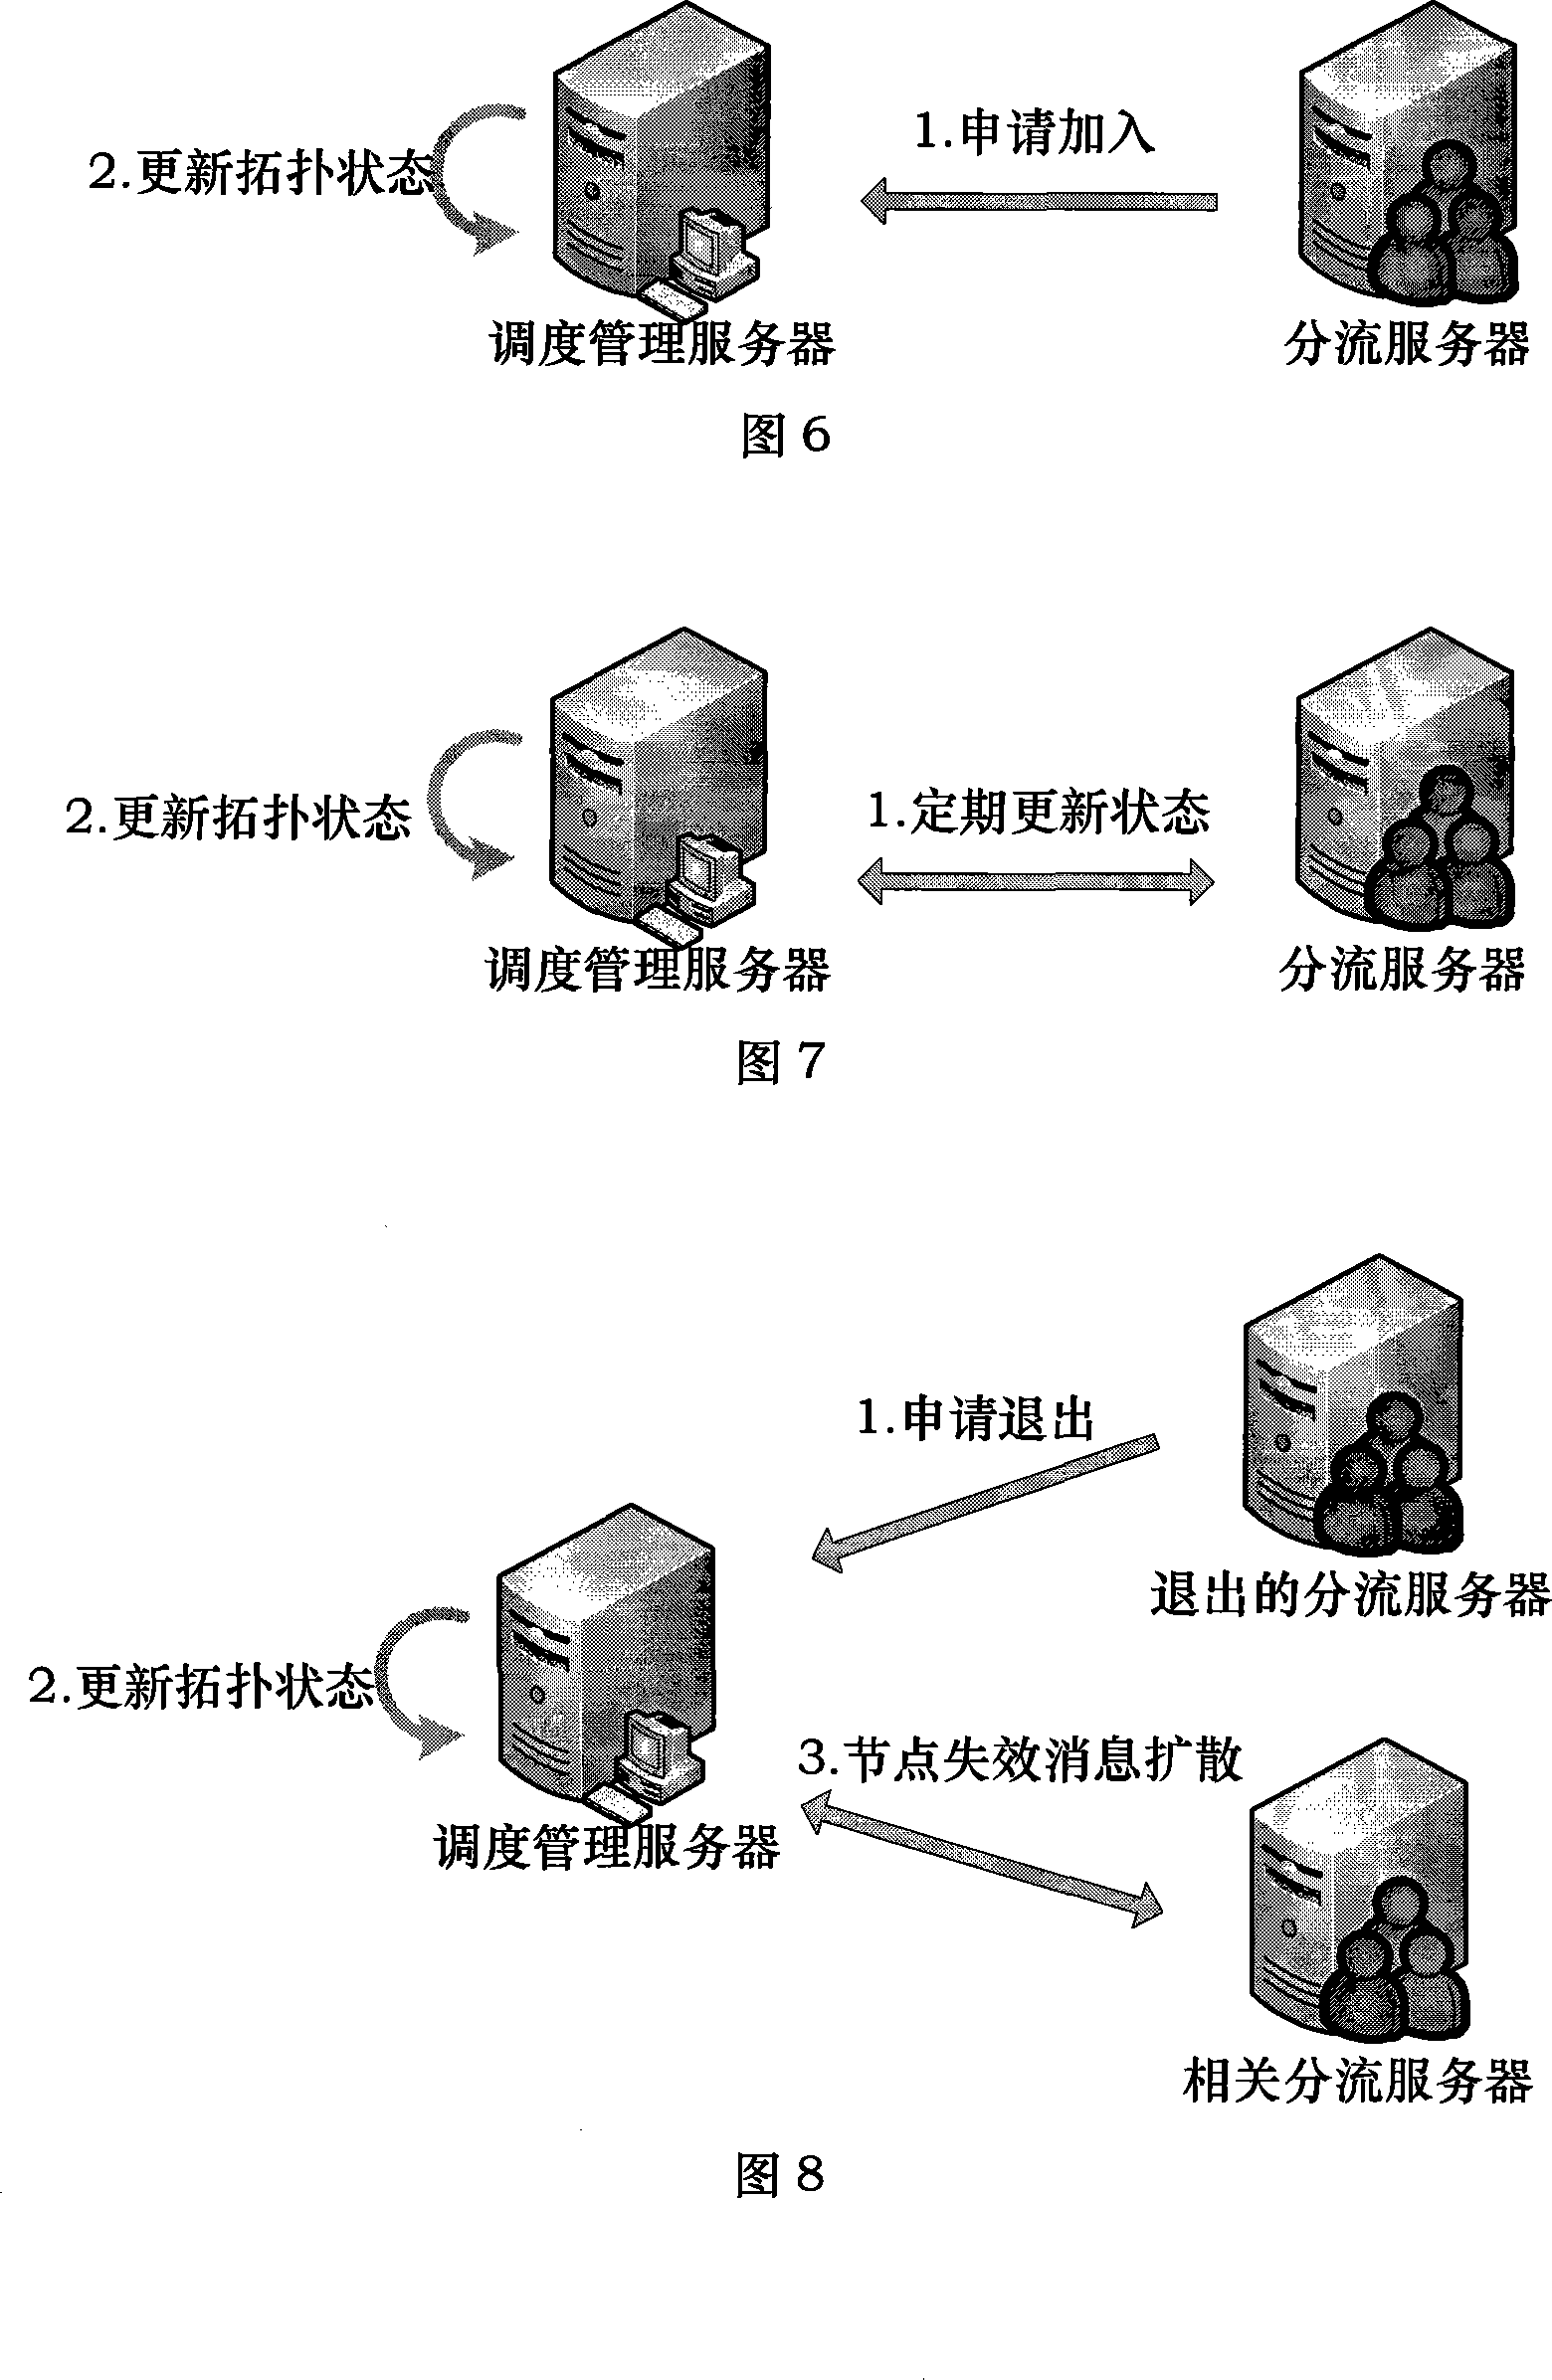 Network video monitoring system and its data exchanging method